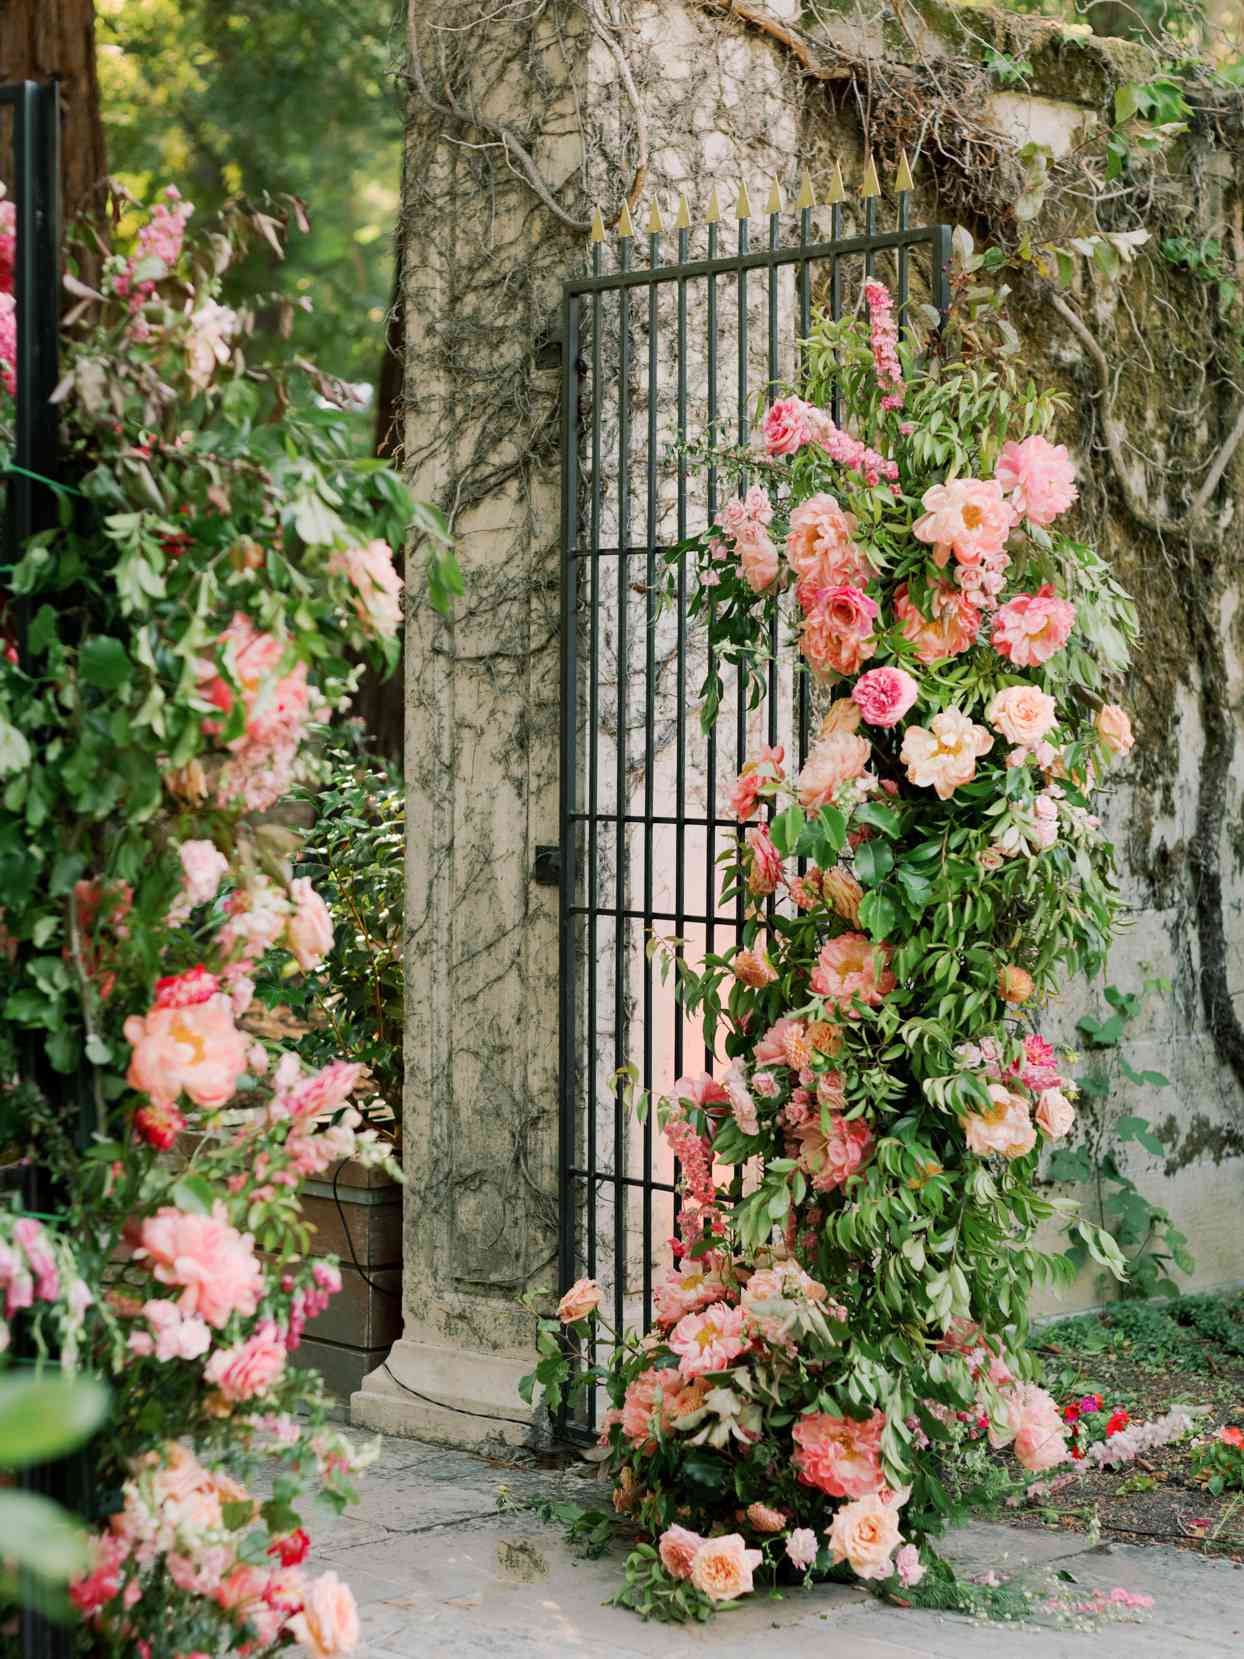 black iron wedding gate with pink floral decor